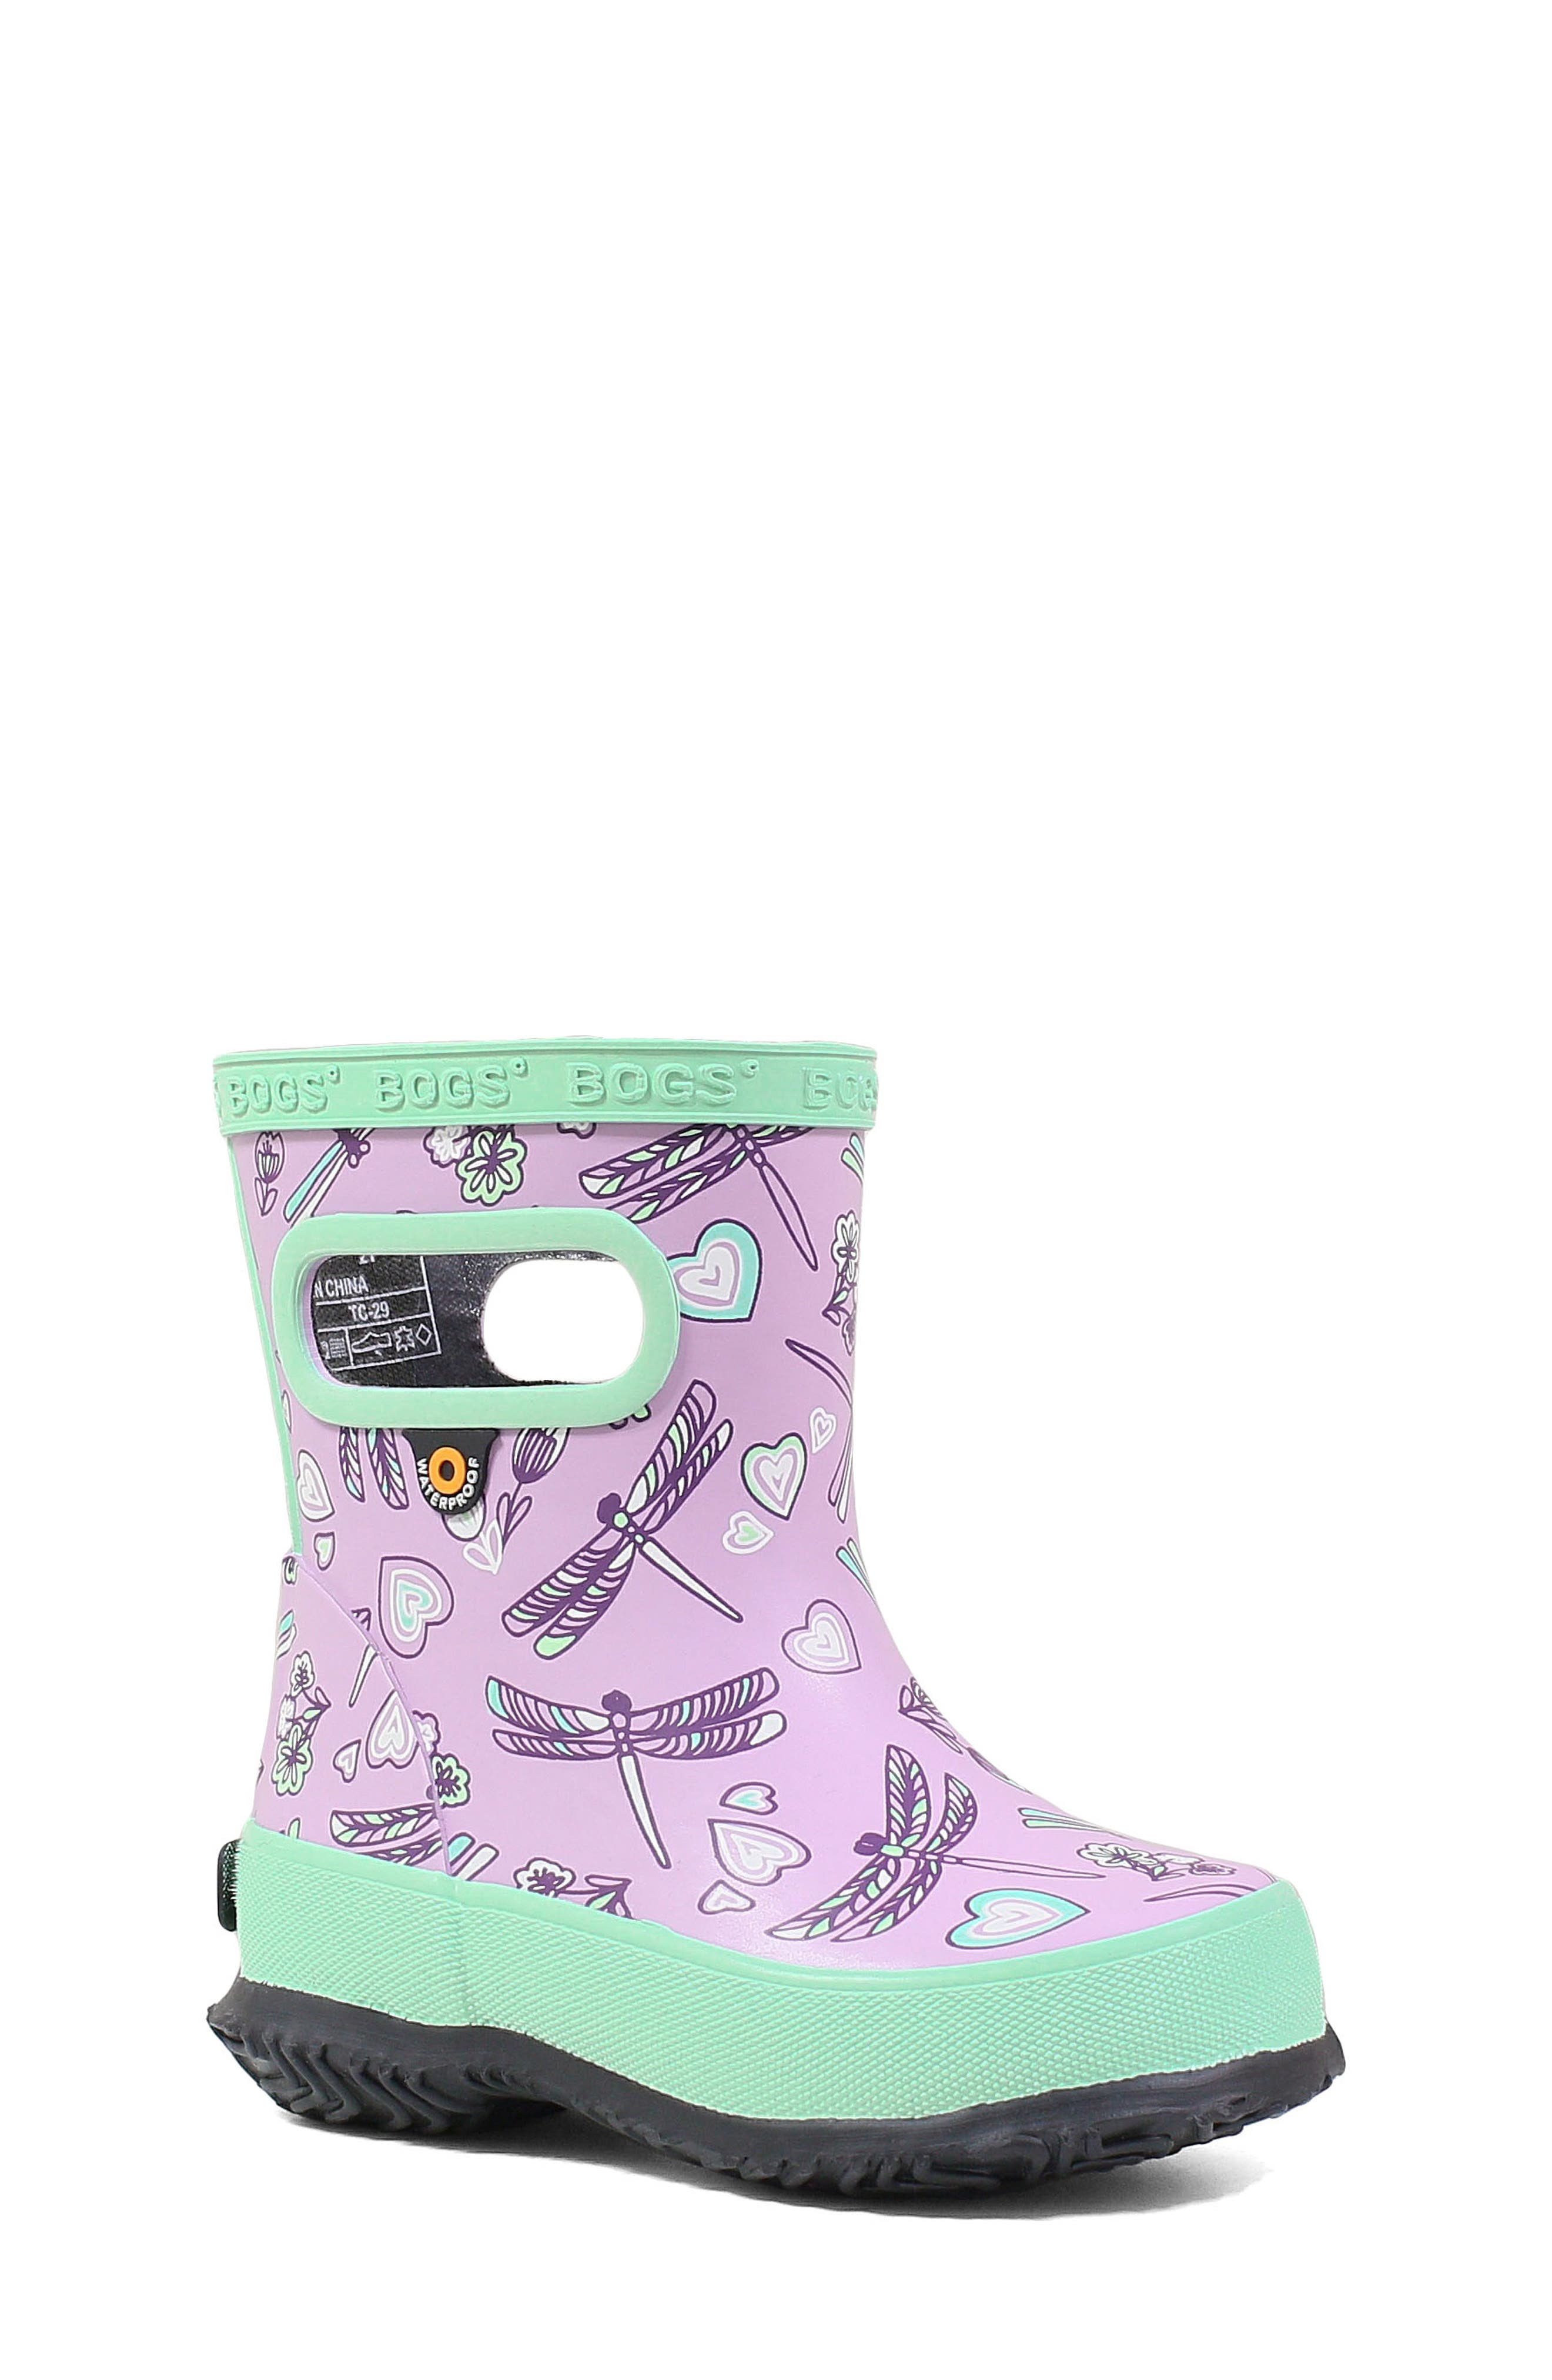 Toddler Girls' Bogs Shoes (Sizes 7.5-12)